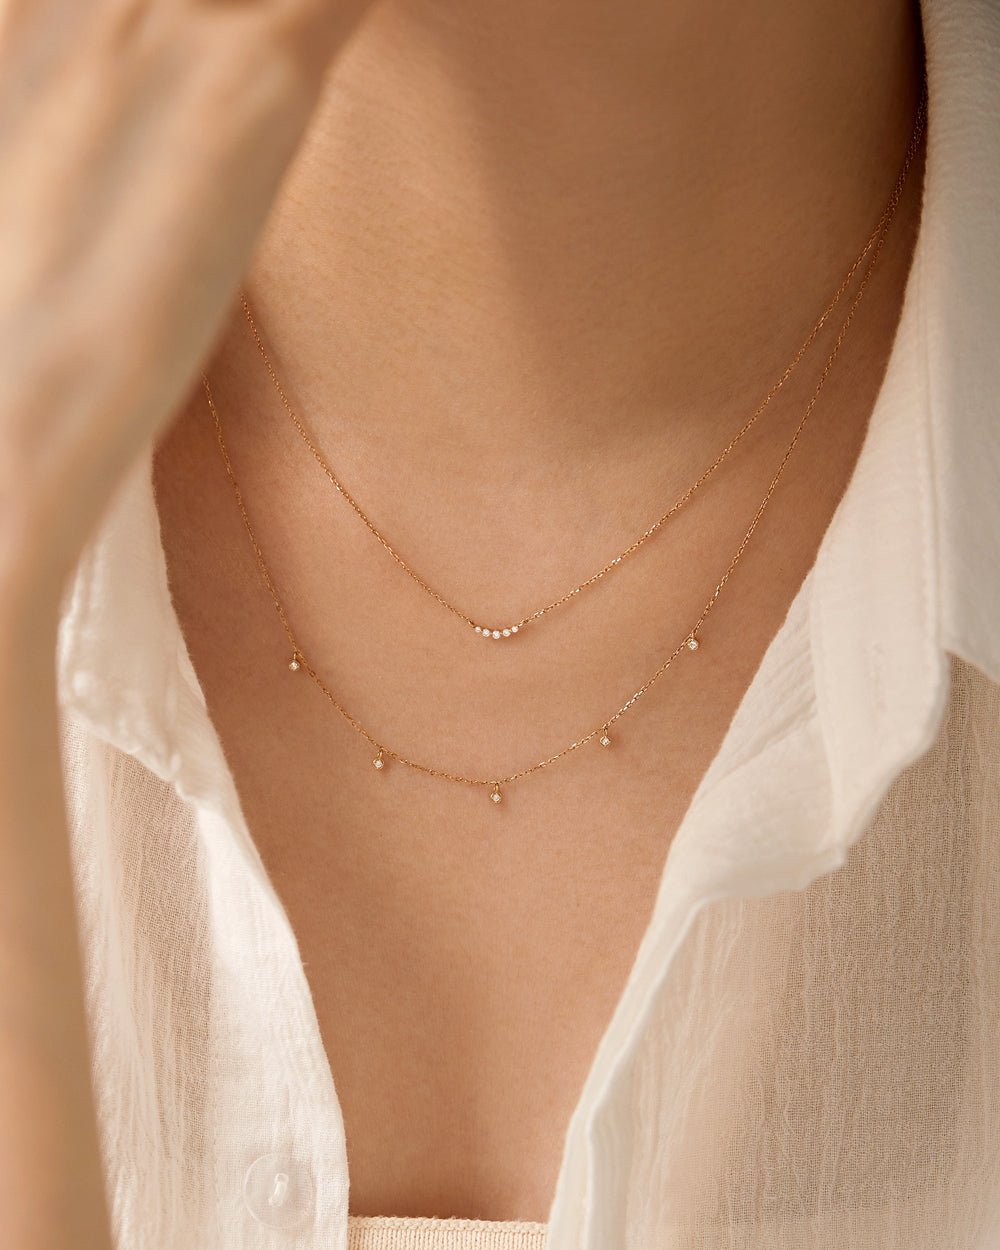 COVE MINI CURVED DIAMOND NECKLACE - Shop Cupcakes and Cashmere